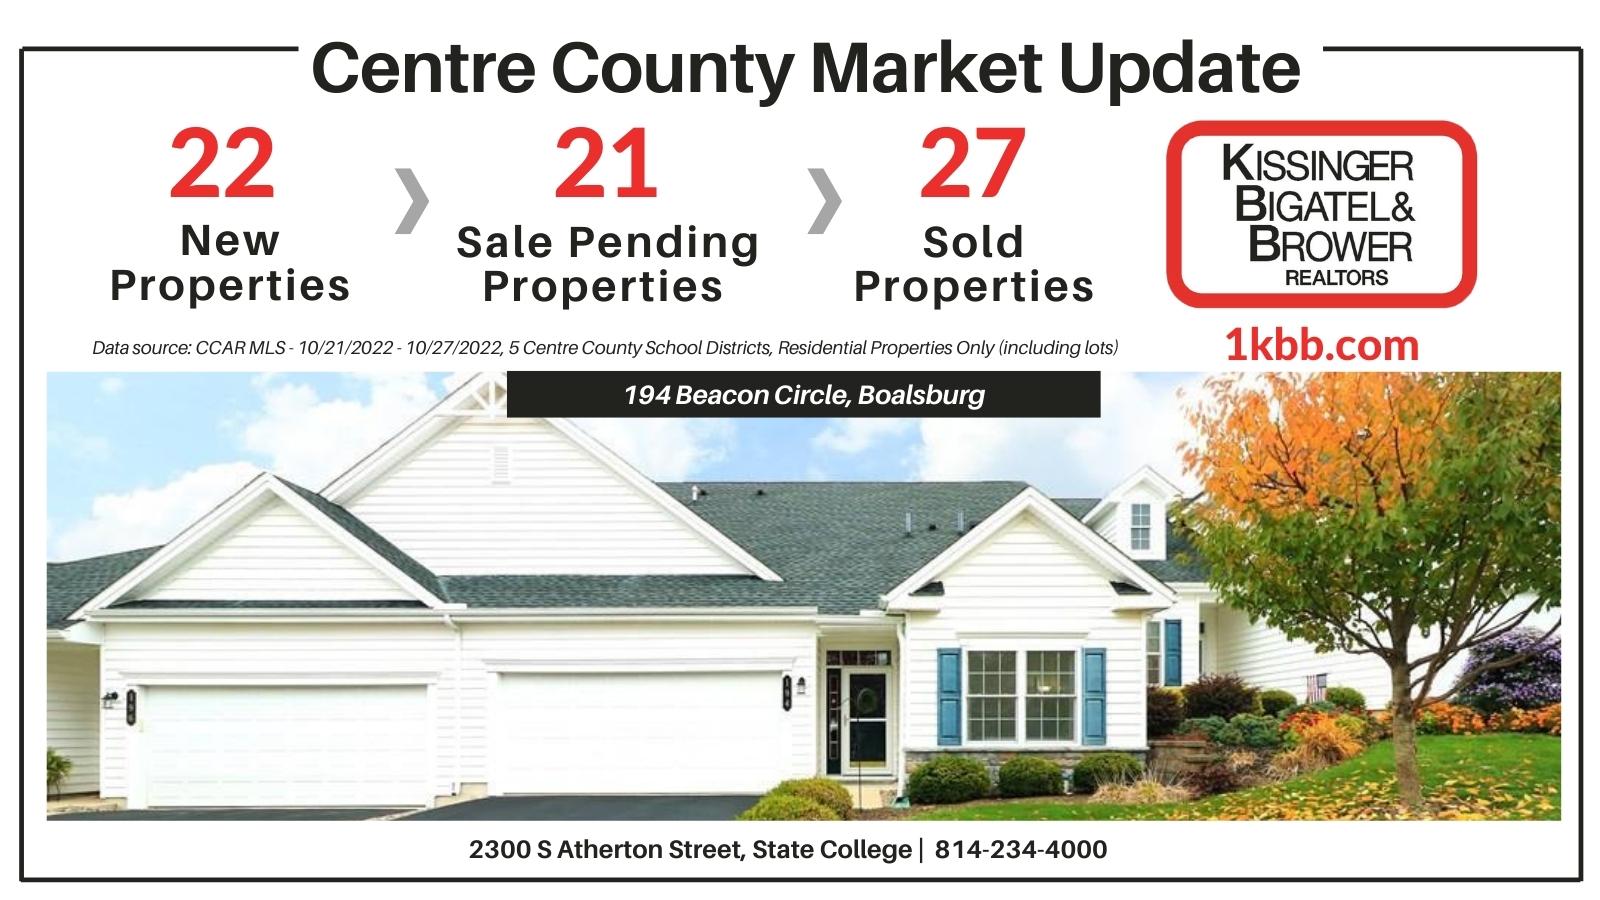 Market Update Report for 10/21-10/27/2022 in Centre County, PA